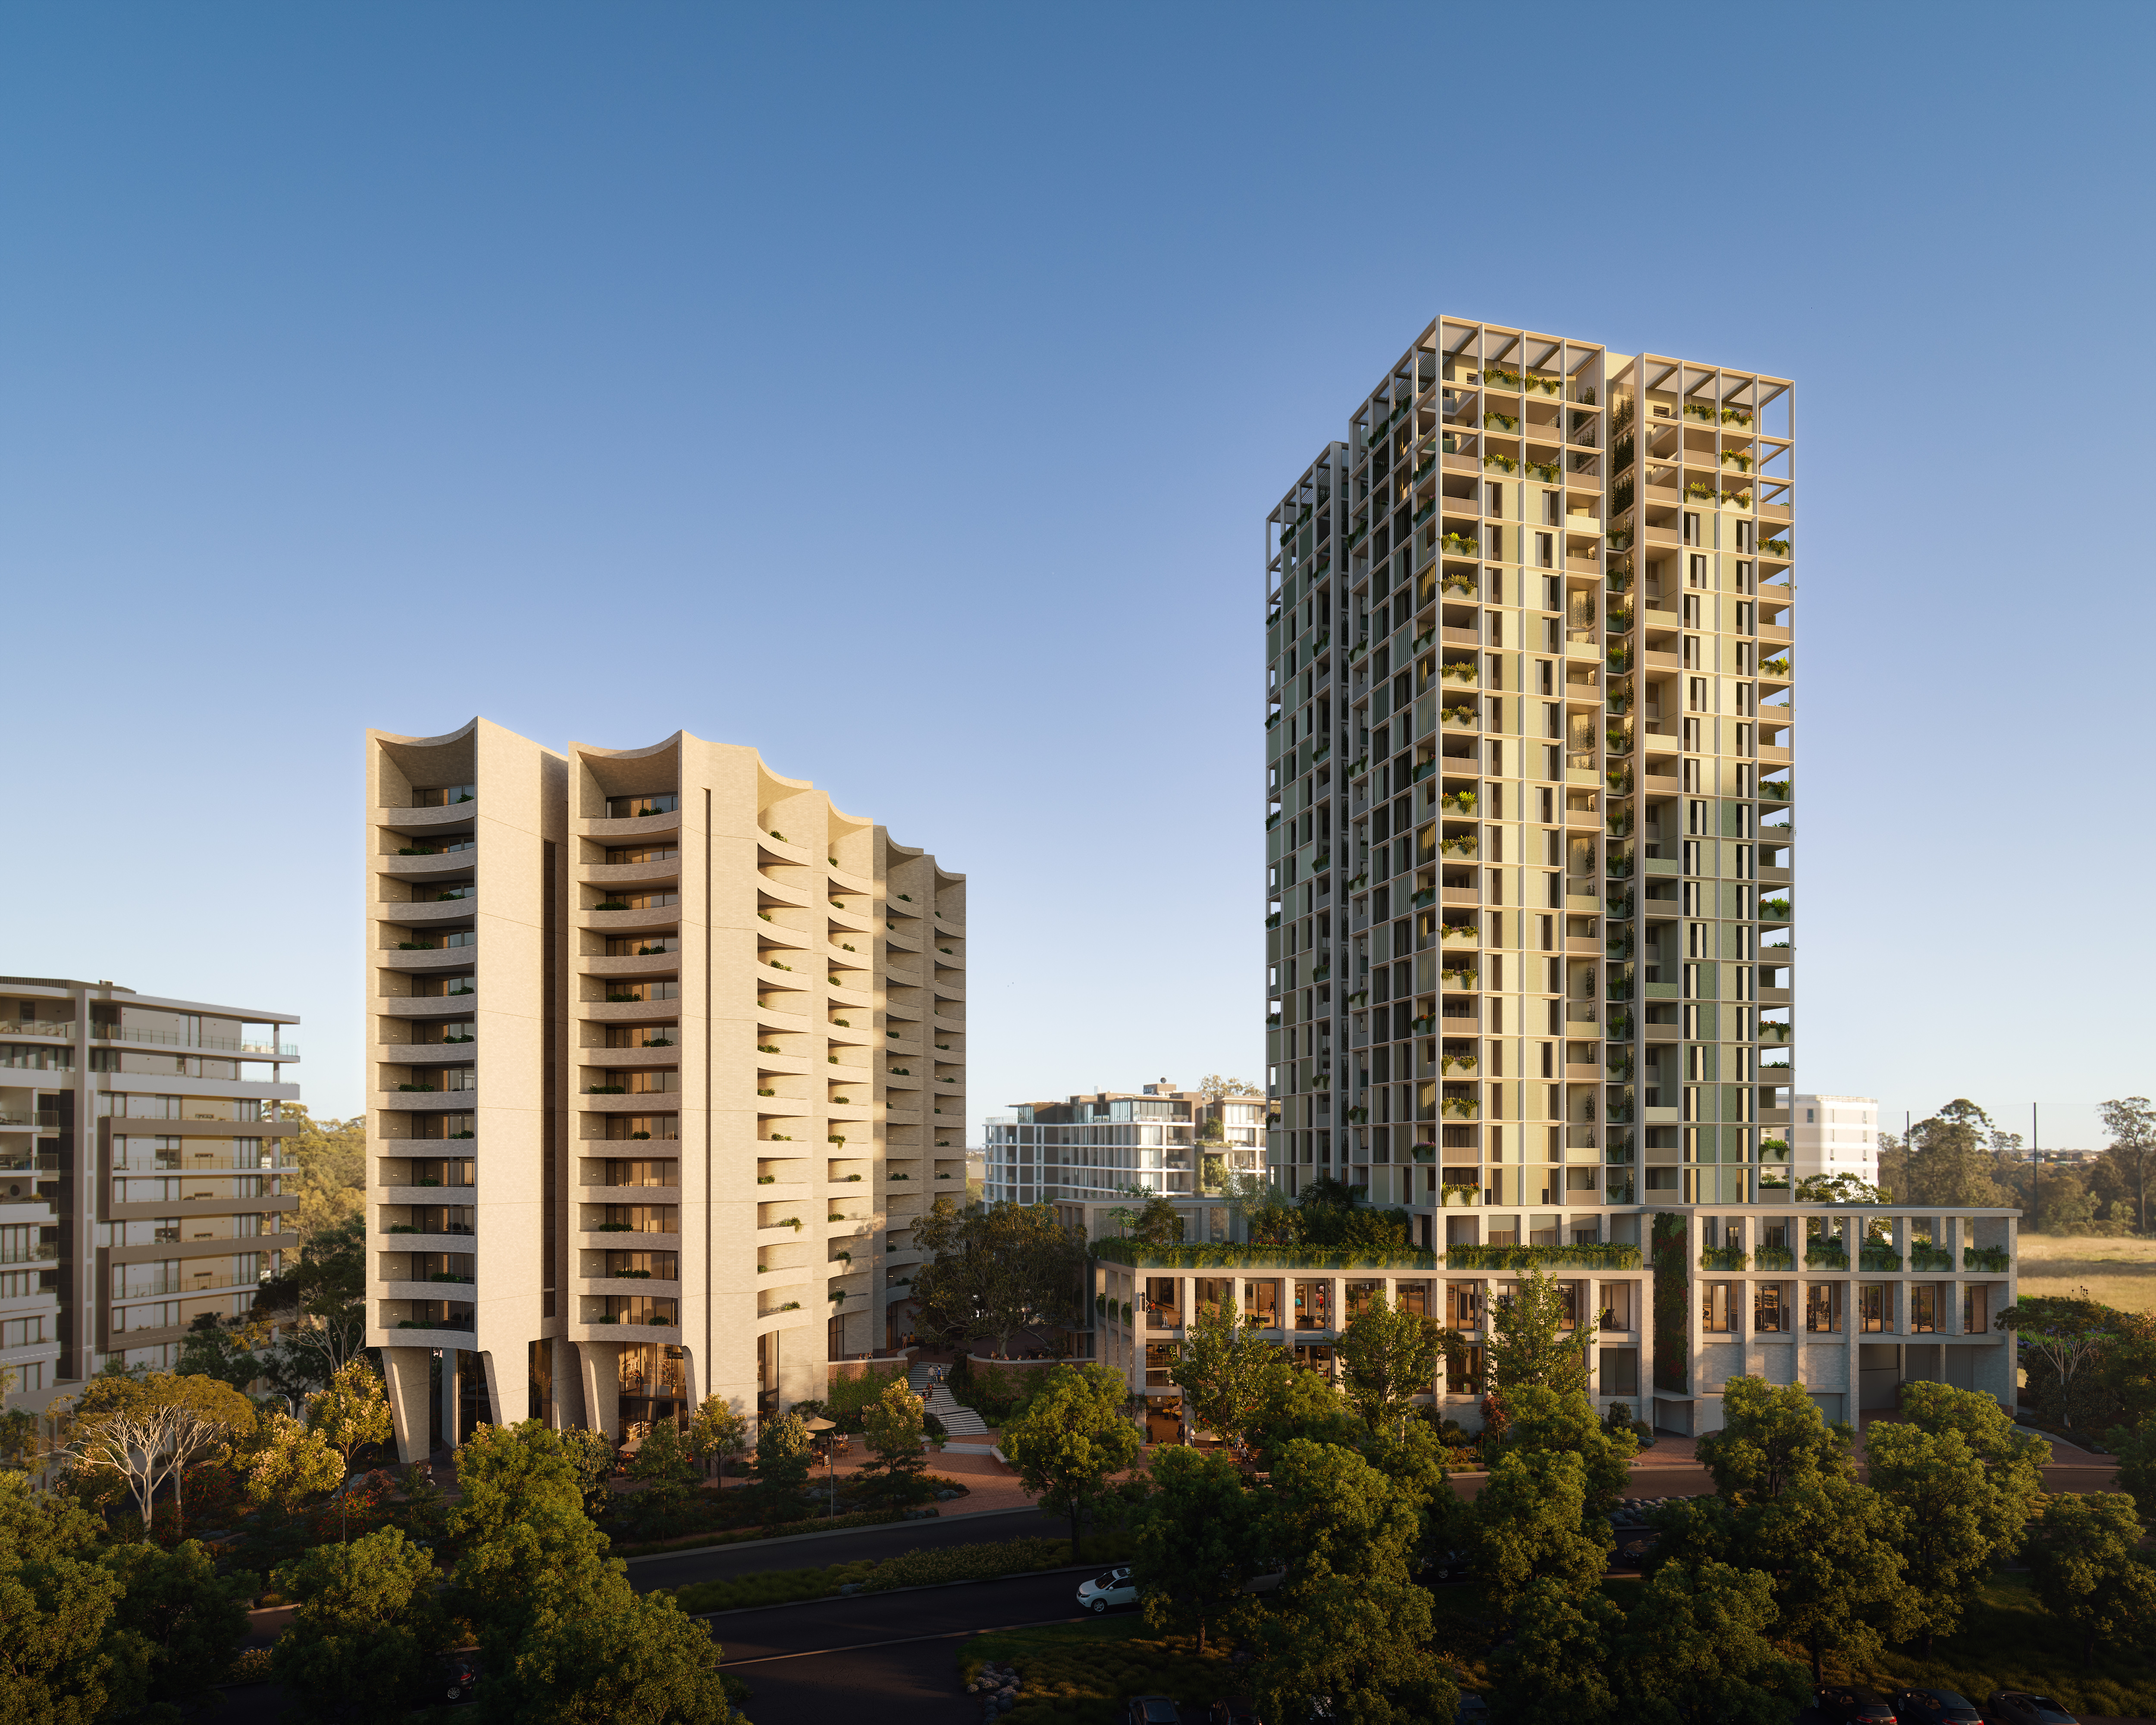 Norwest Quarter buyers may qualify for discounted 'green home loans' due to development's high sustainability credentials